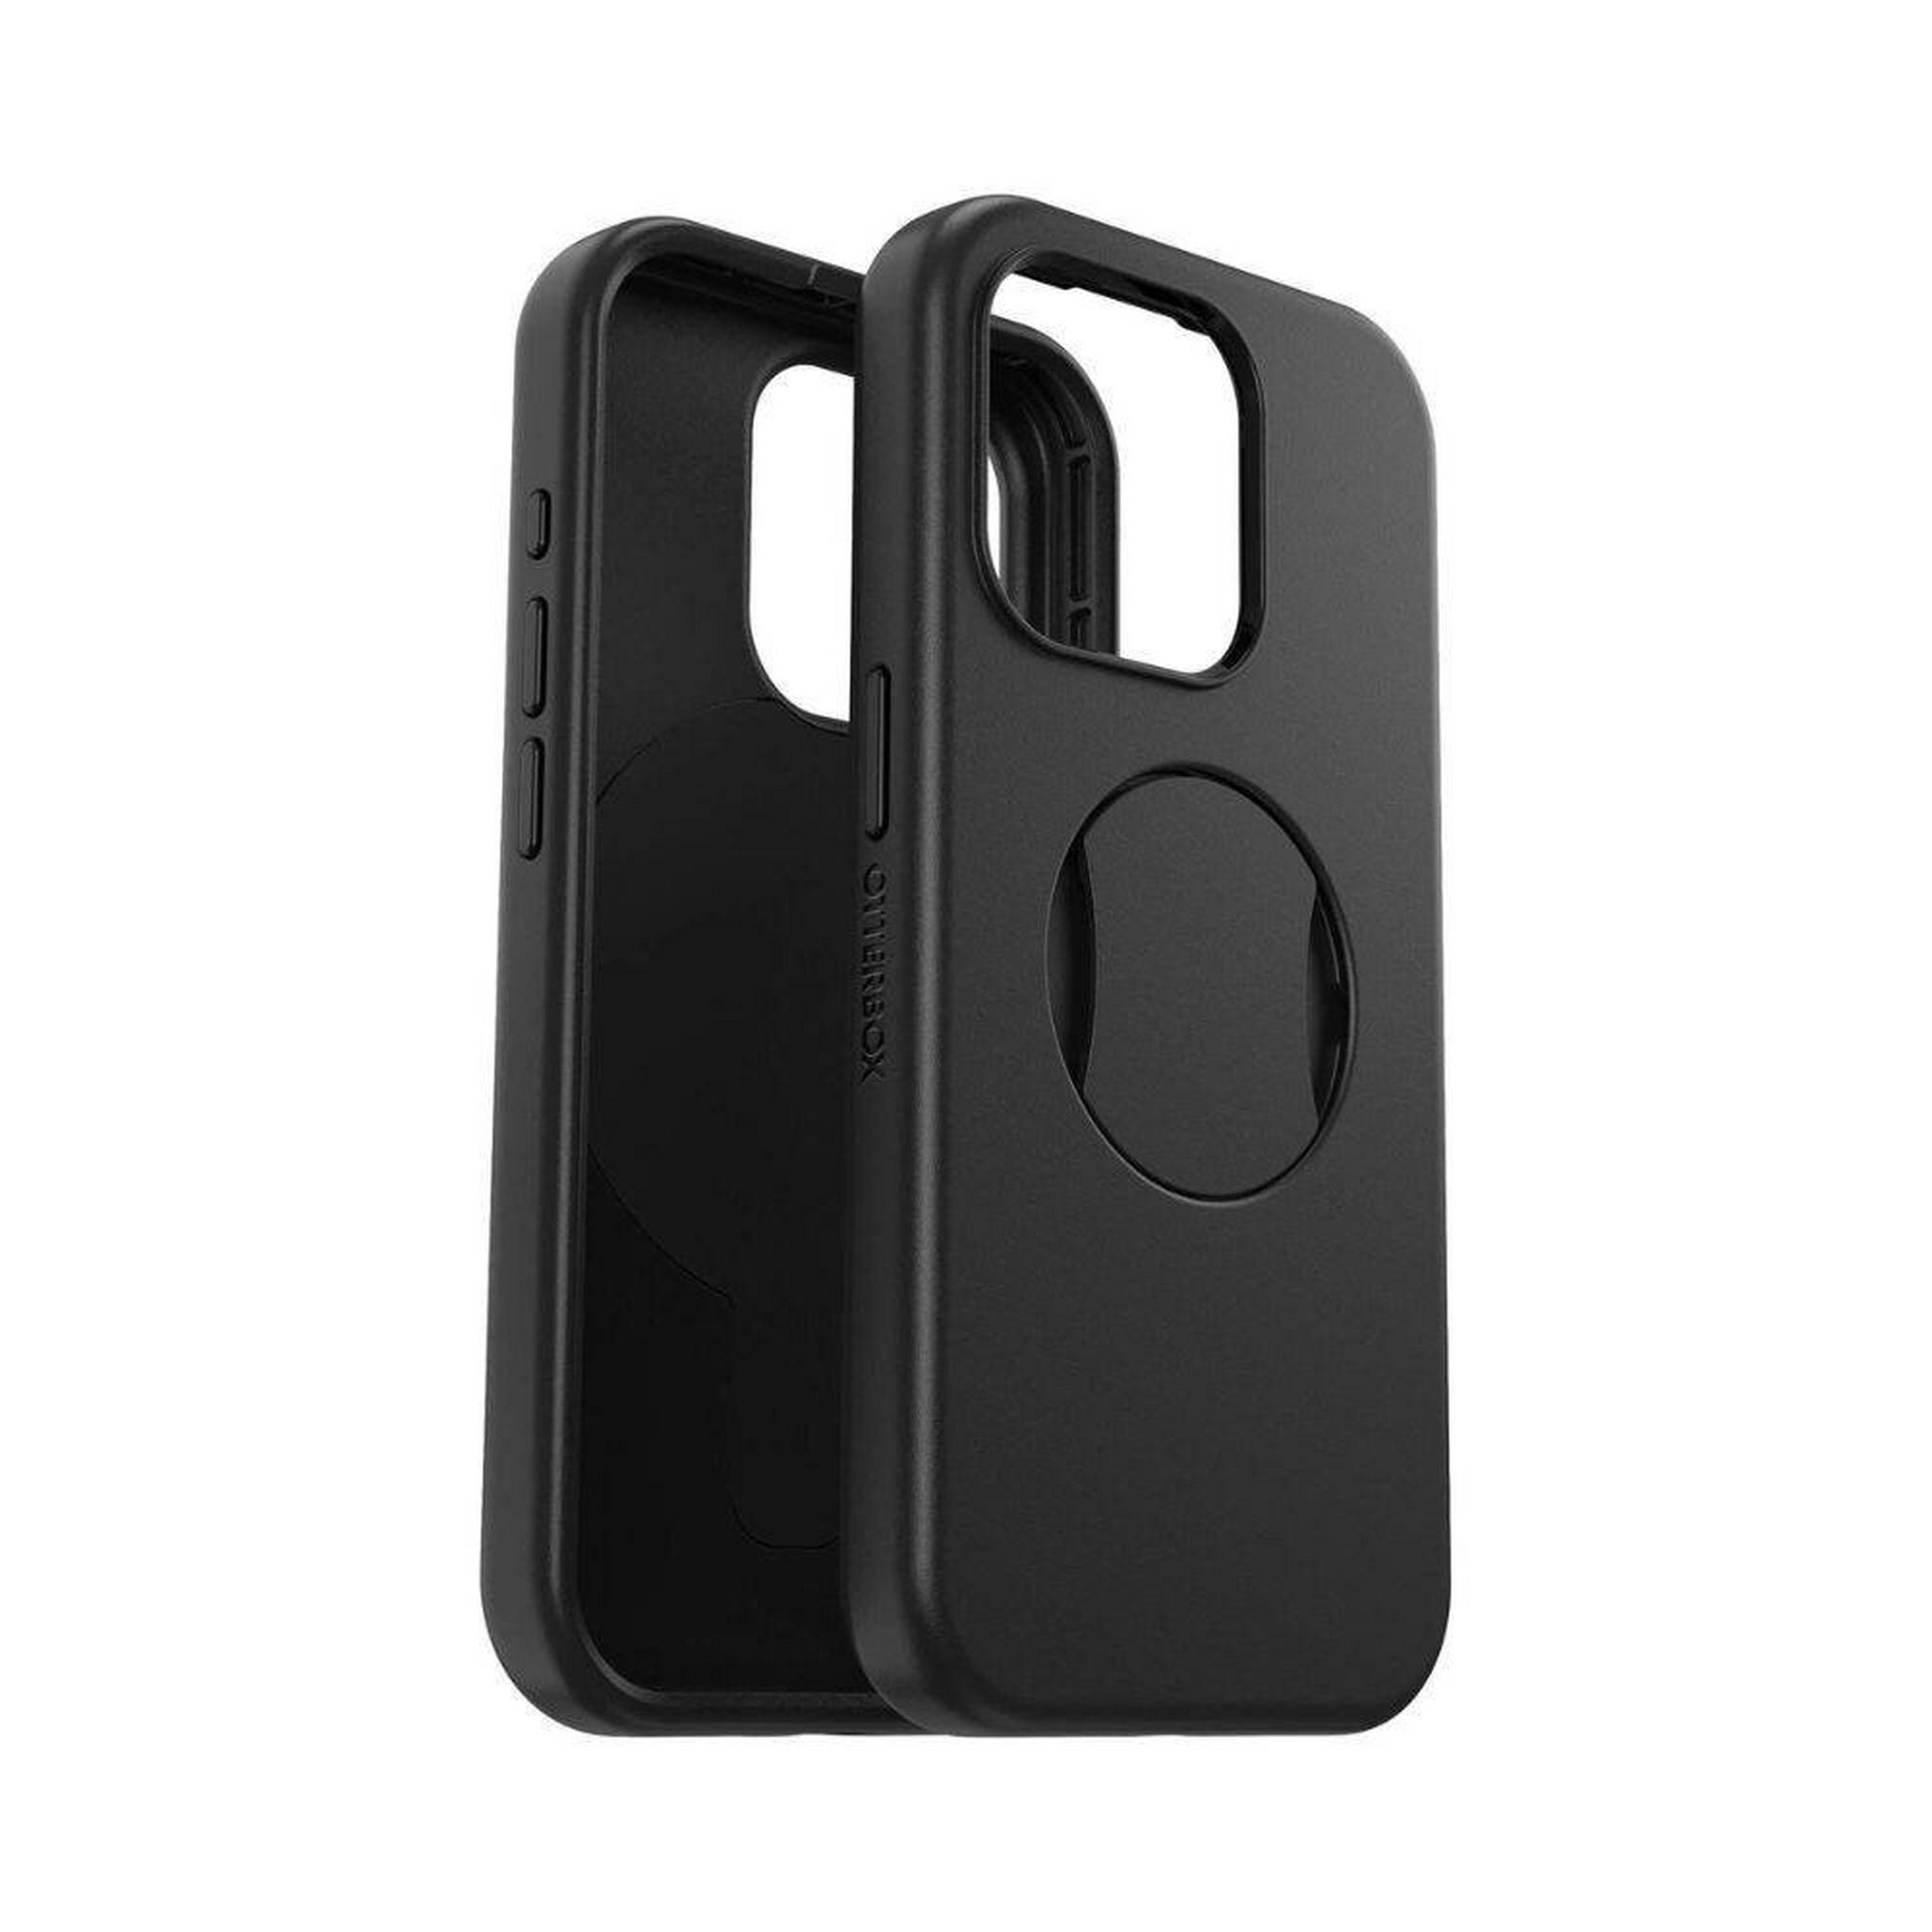 OTTERBOX OtterGrip Symmetry Case for 6.7-inch iPhone 15 Pro Max, 77-93170 – Black